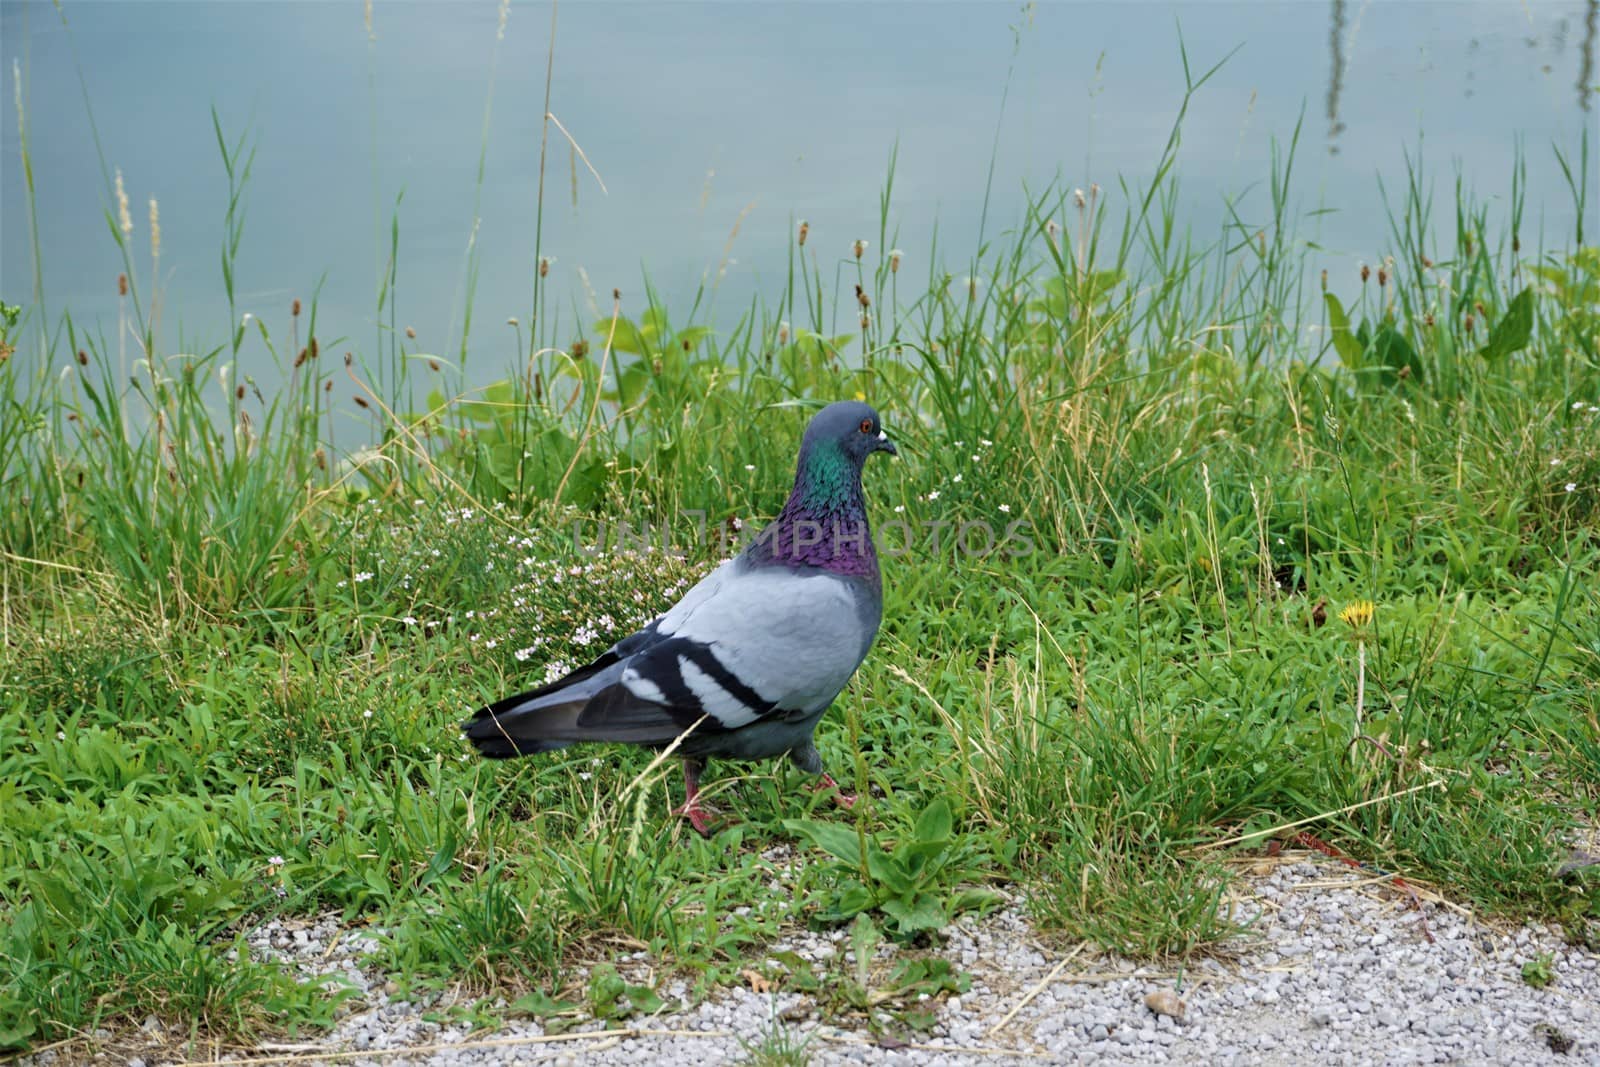 Pigeon in Maribor, Slovenia walking by the Drava river